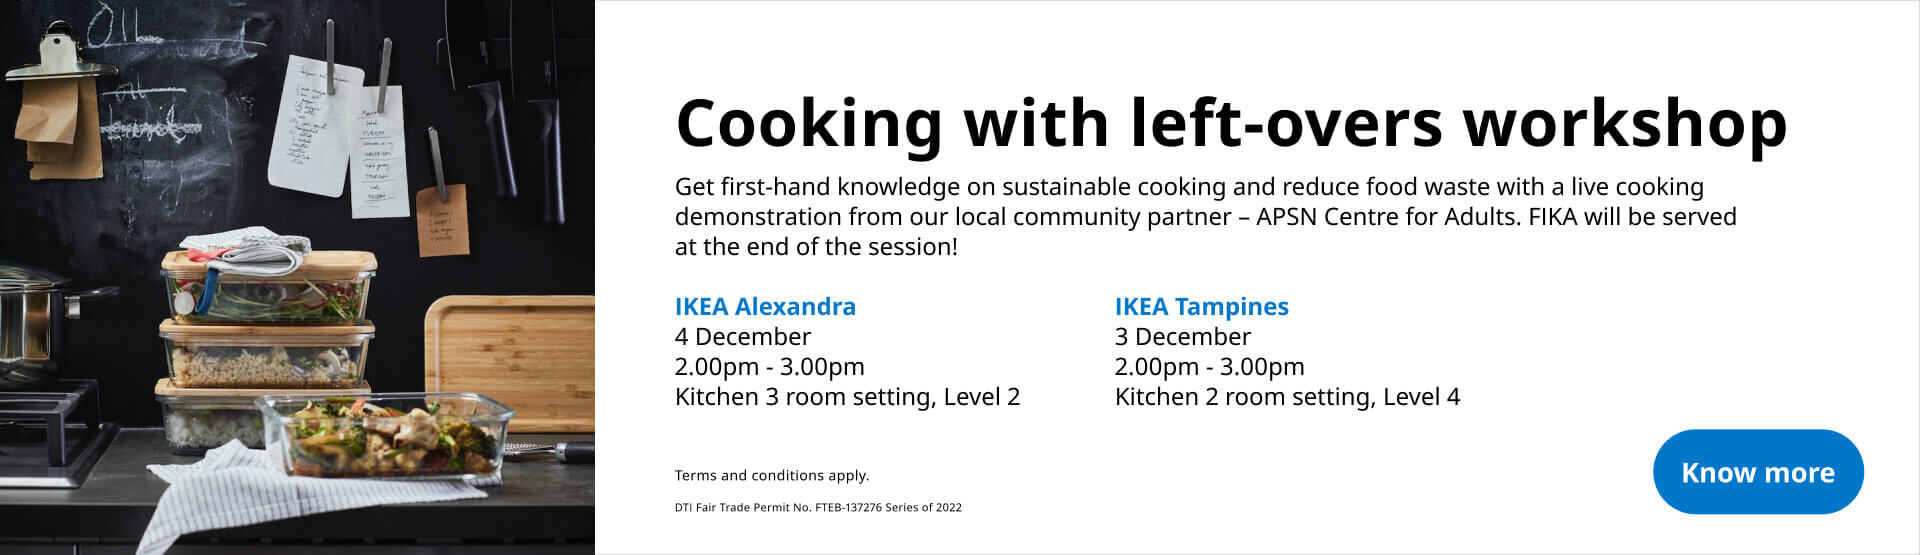 Cooking with left-overs workshop